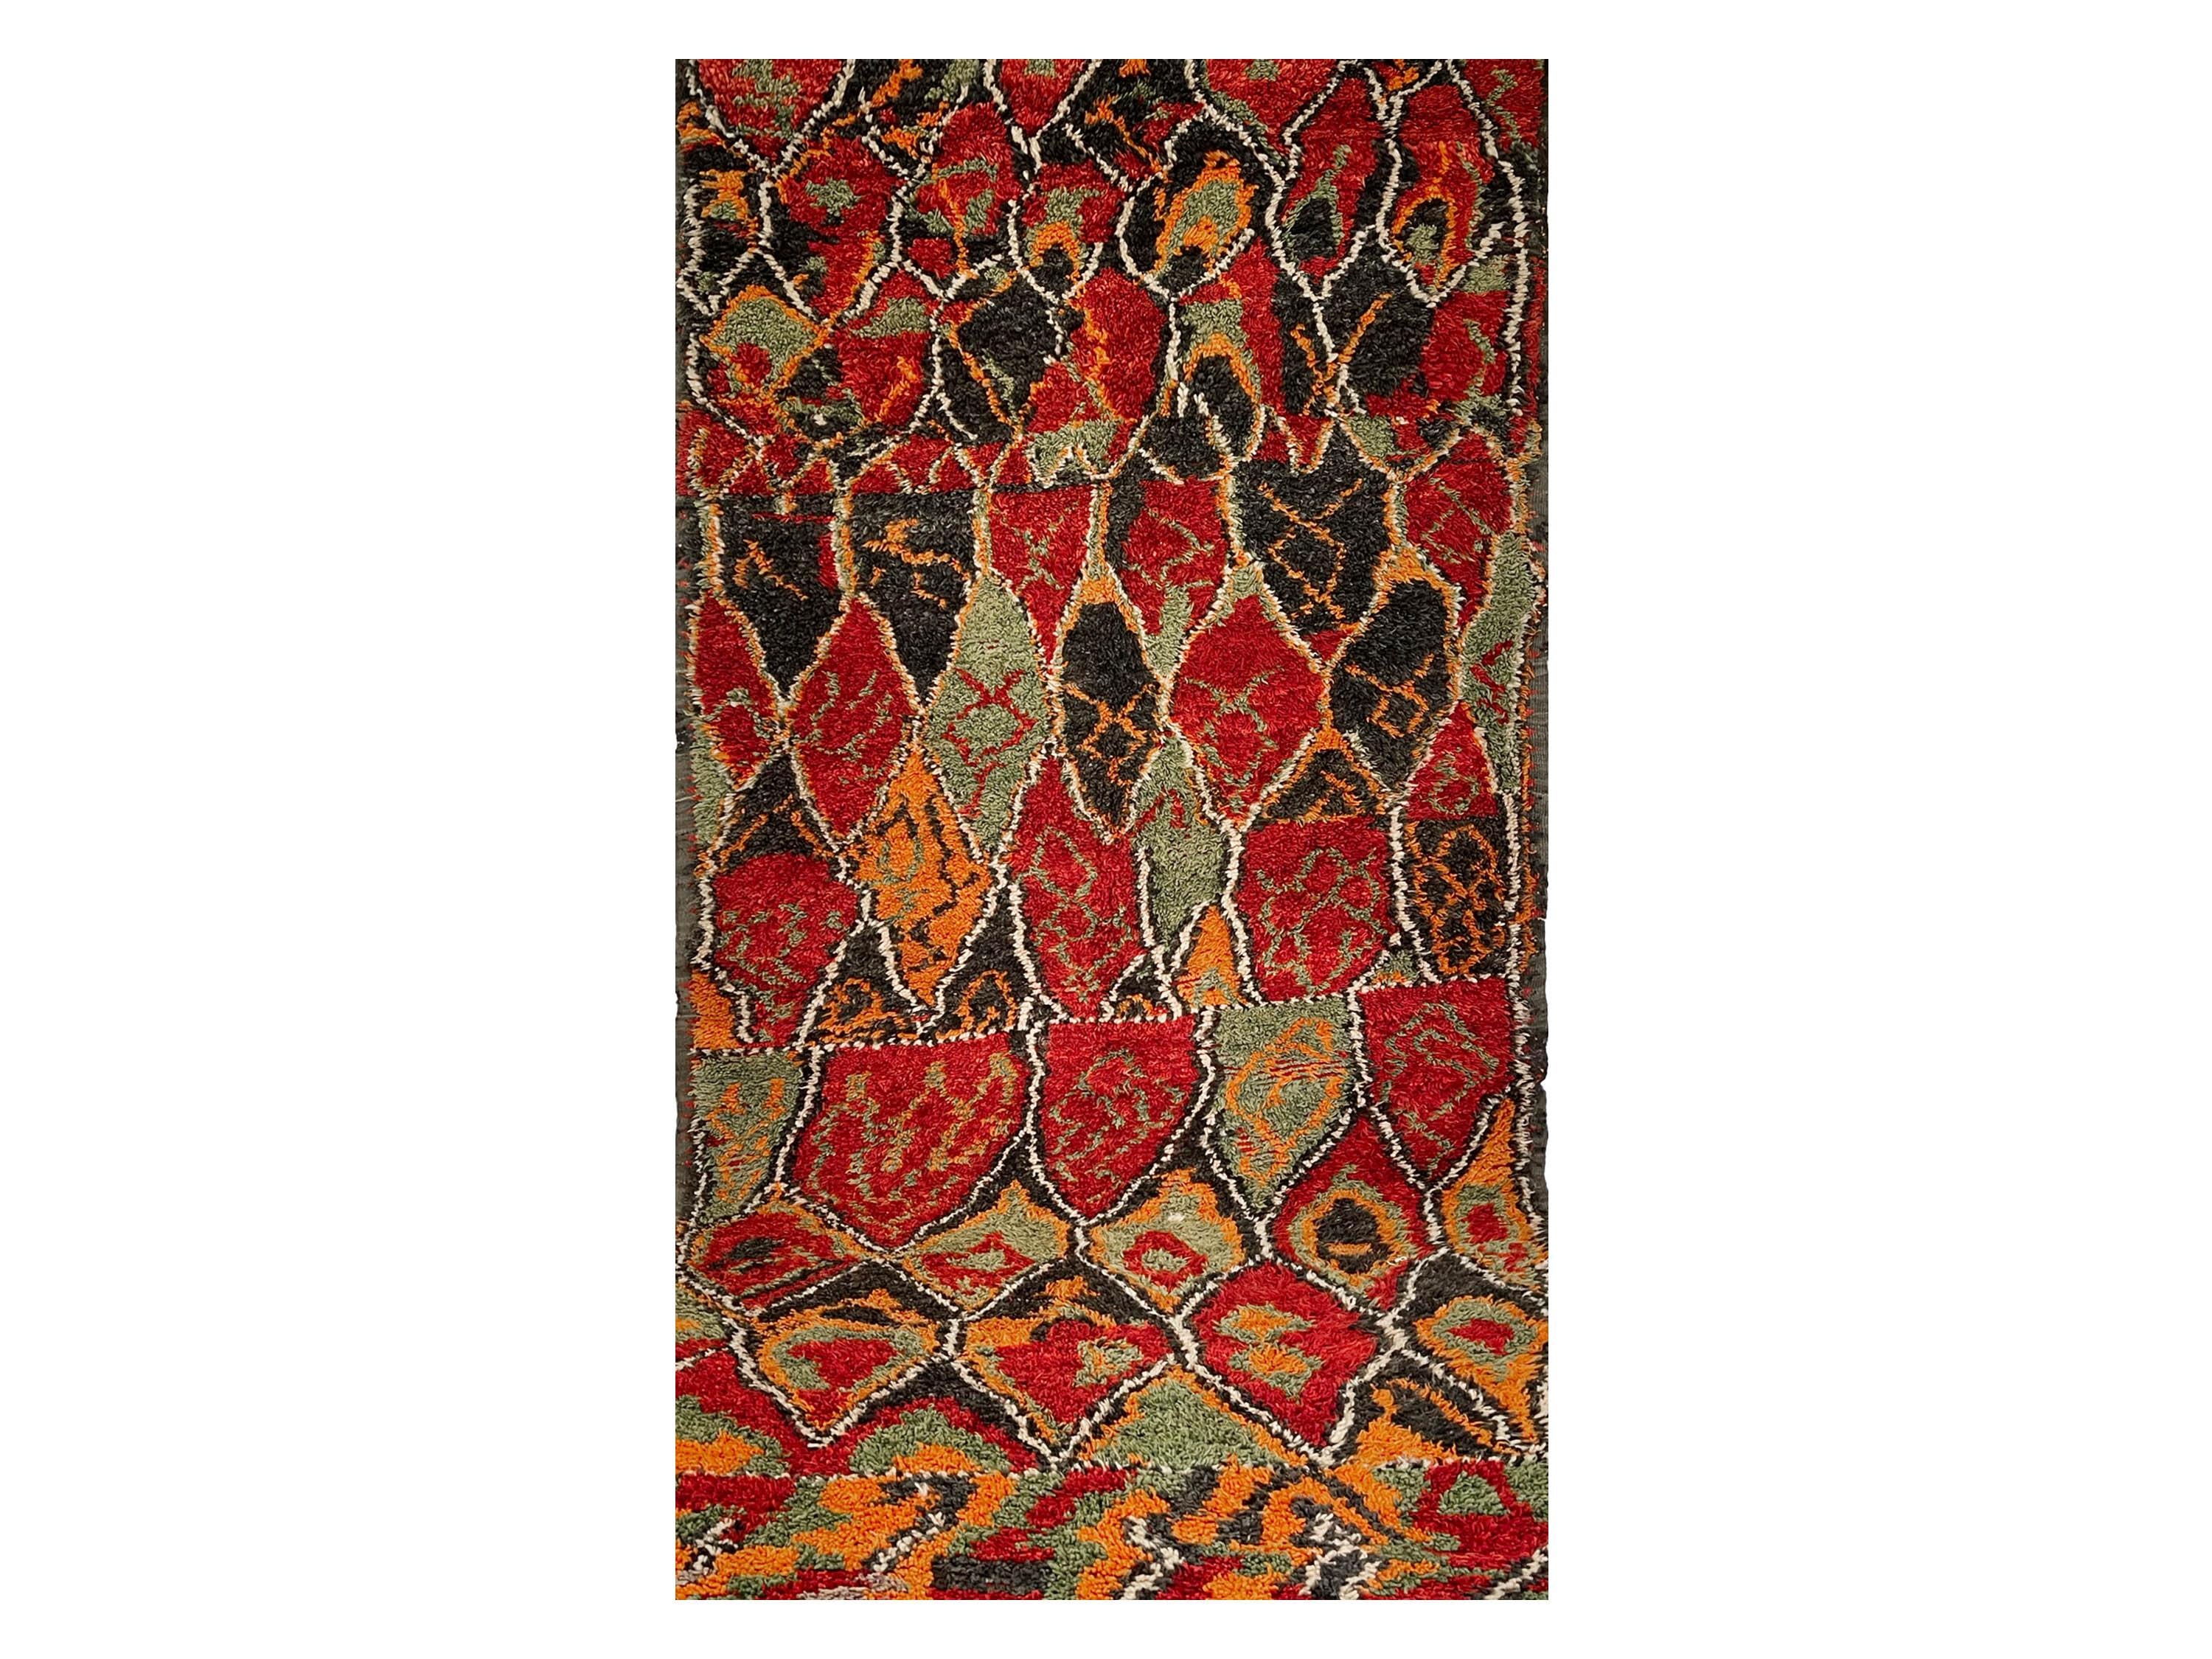 Presenting a captivating array of diamond patterns combined with crisp hues of red and orange, this carpet awes any viewer with unique designs representing a vintage Moroccan culture. 

“The Fruit” creates an irresistible charm with its creative